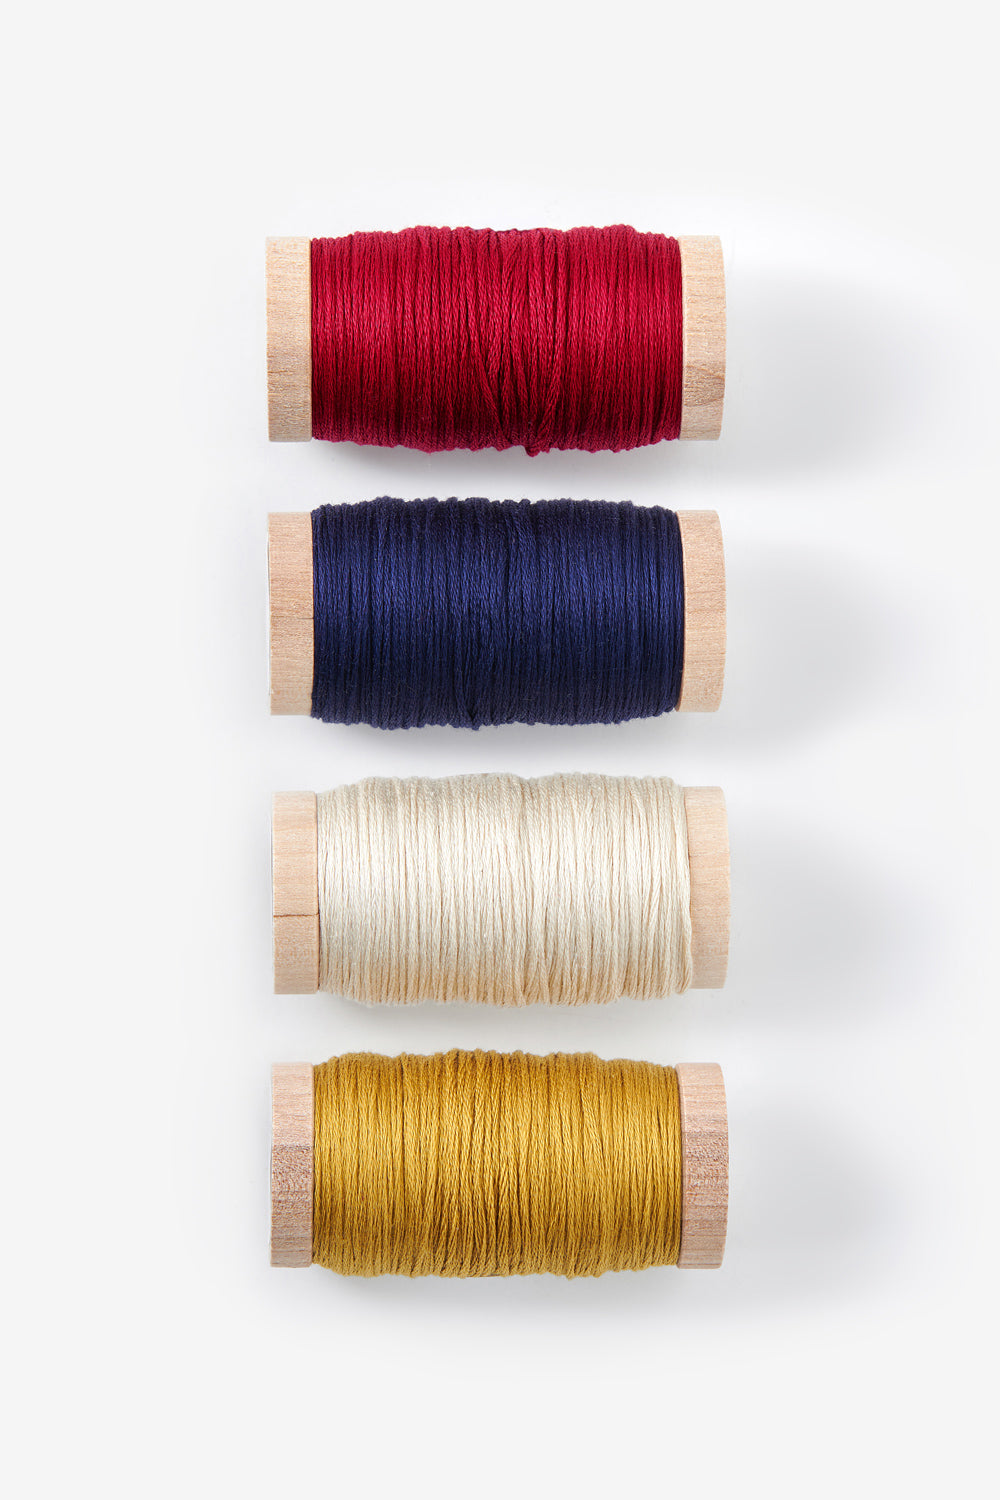 The School of Making Embroidery Floss Bundle Primary Colored Floss for Embroidery Embellishments.